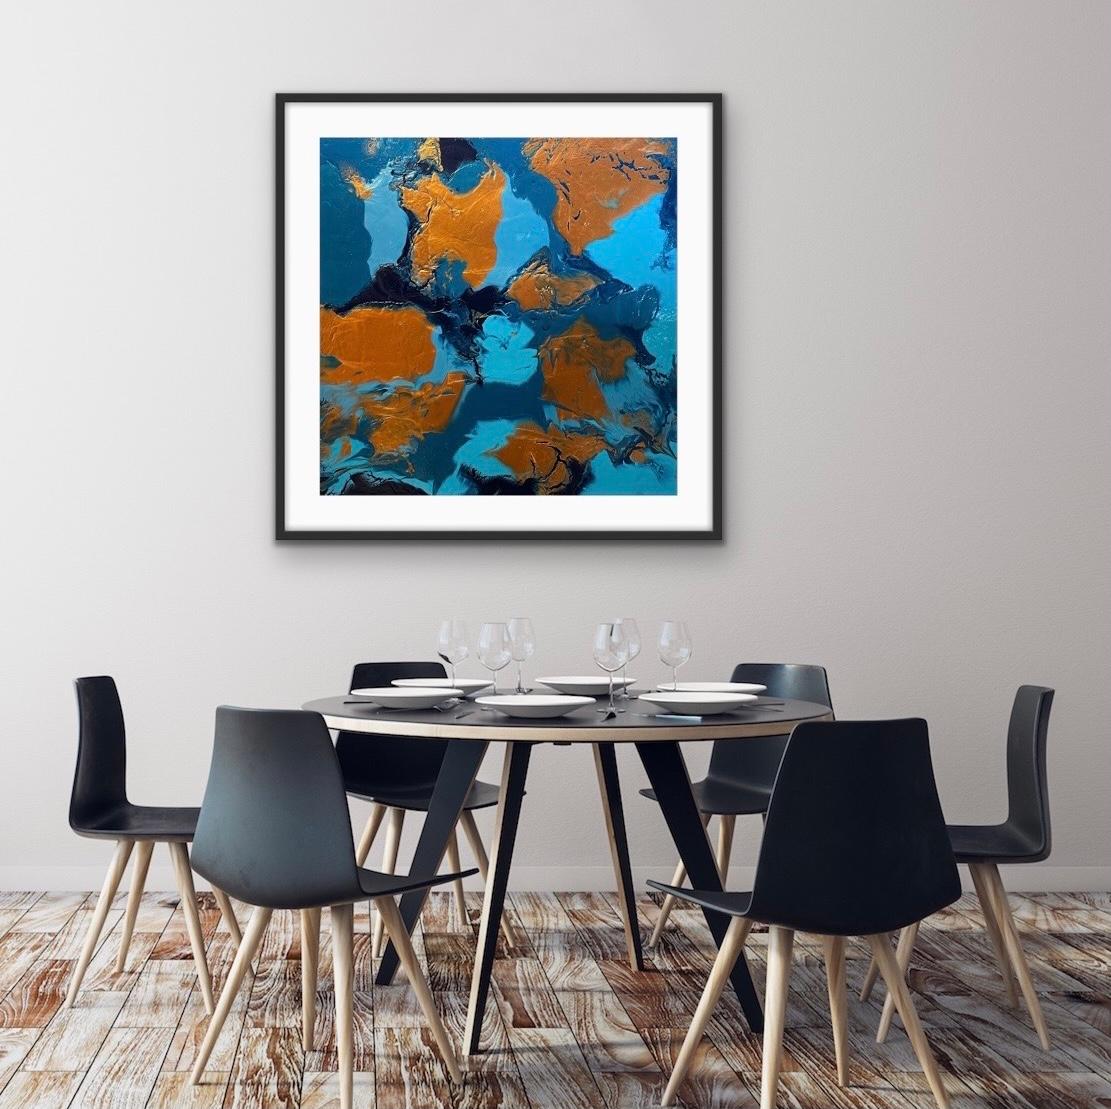 Pools of copper and waves of blue dance on this canvas. Your eyes are soothed by the calm colors. Don't be fooled by the color combinations as each color layer is nuanced and textured.